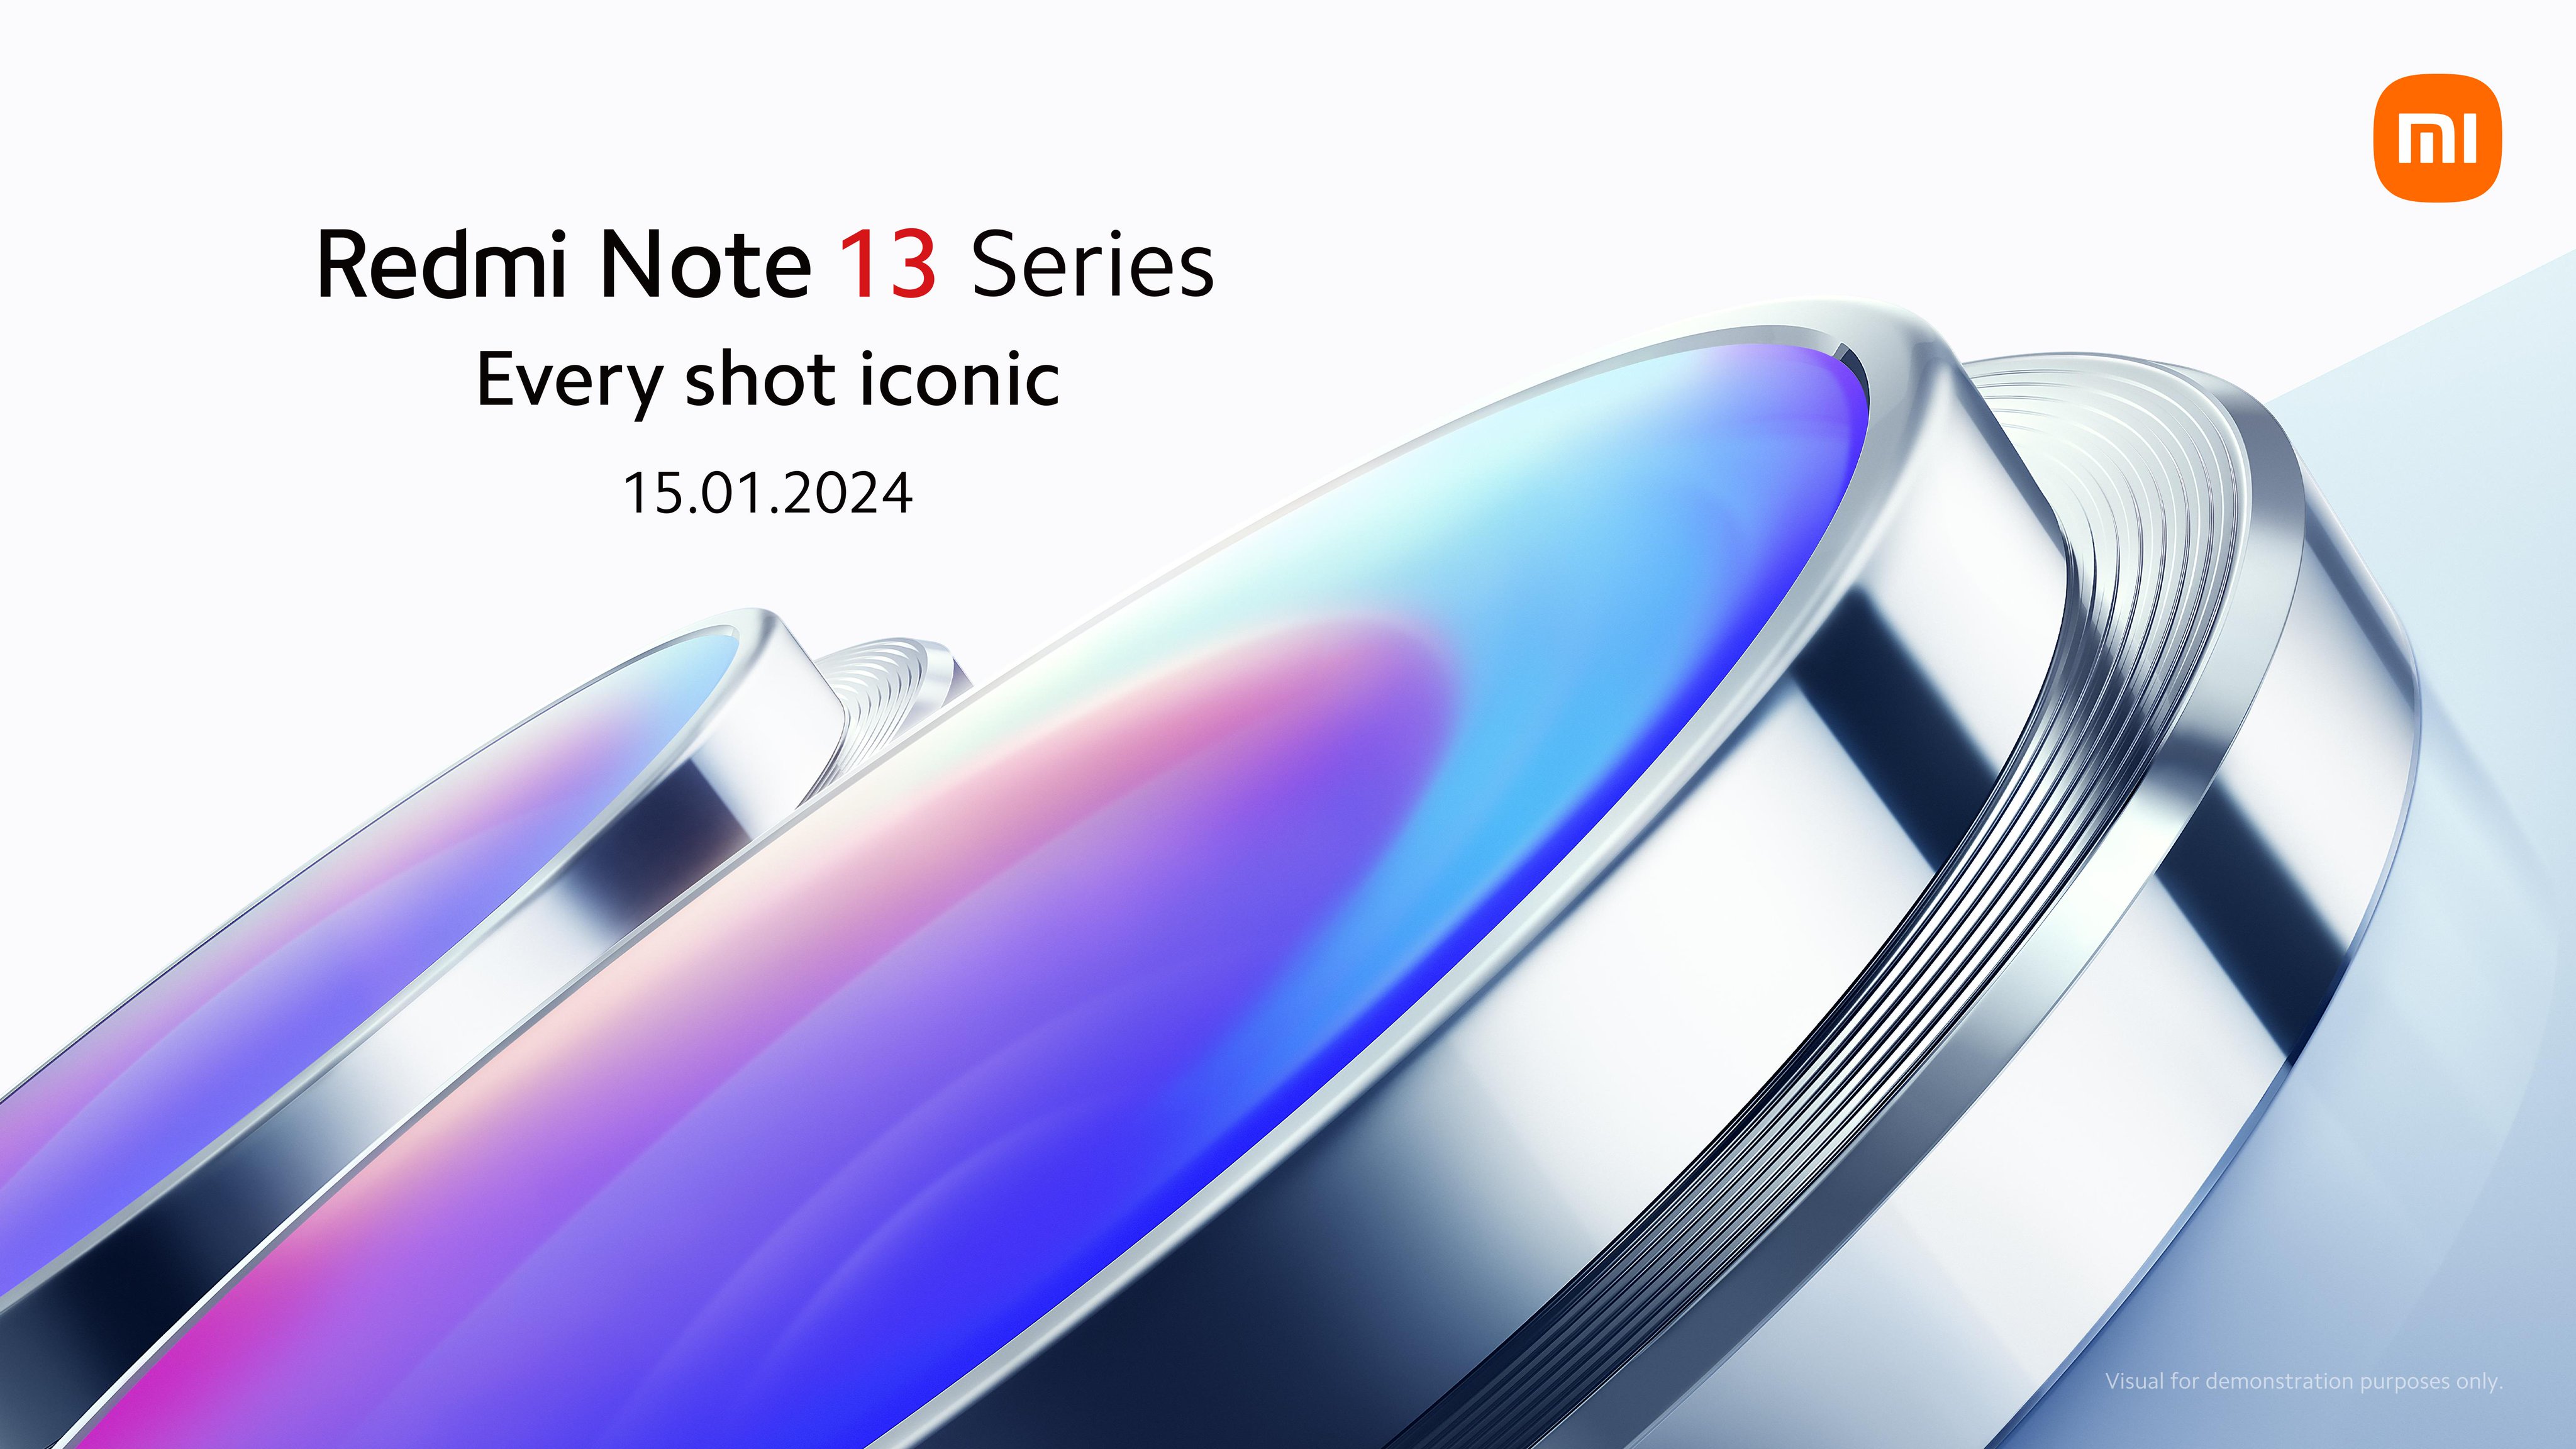 Xiaomi will unveil the Redmi Note 13 series of smartphones in the global market on January 15